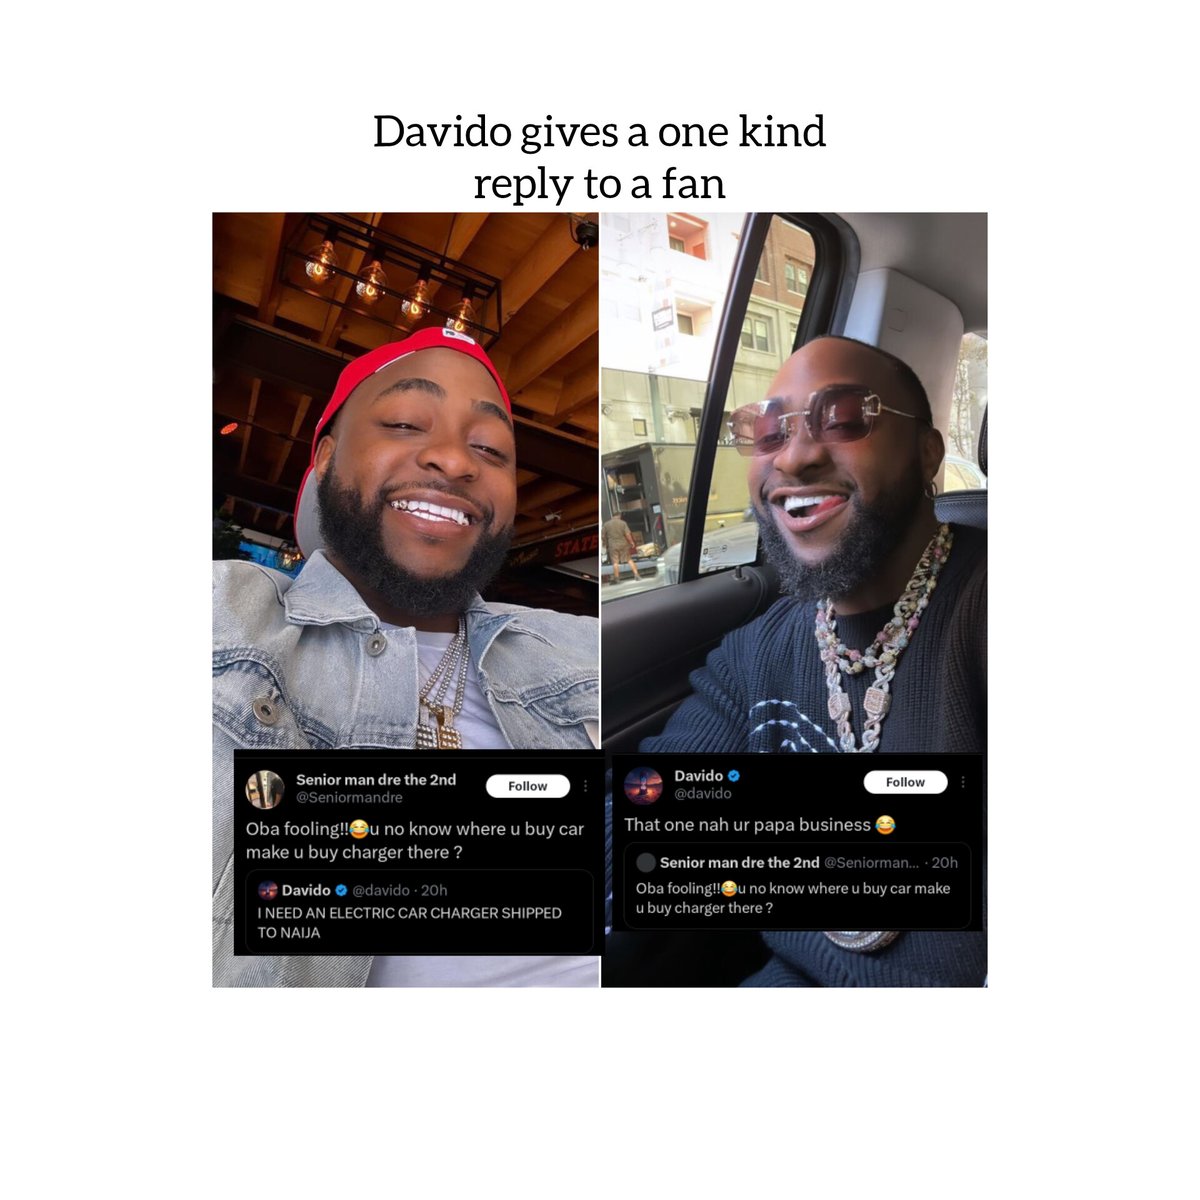 Davido gives a one kind reply to a fan